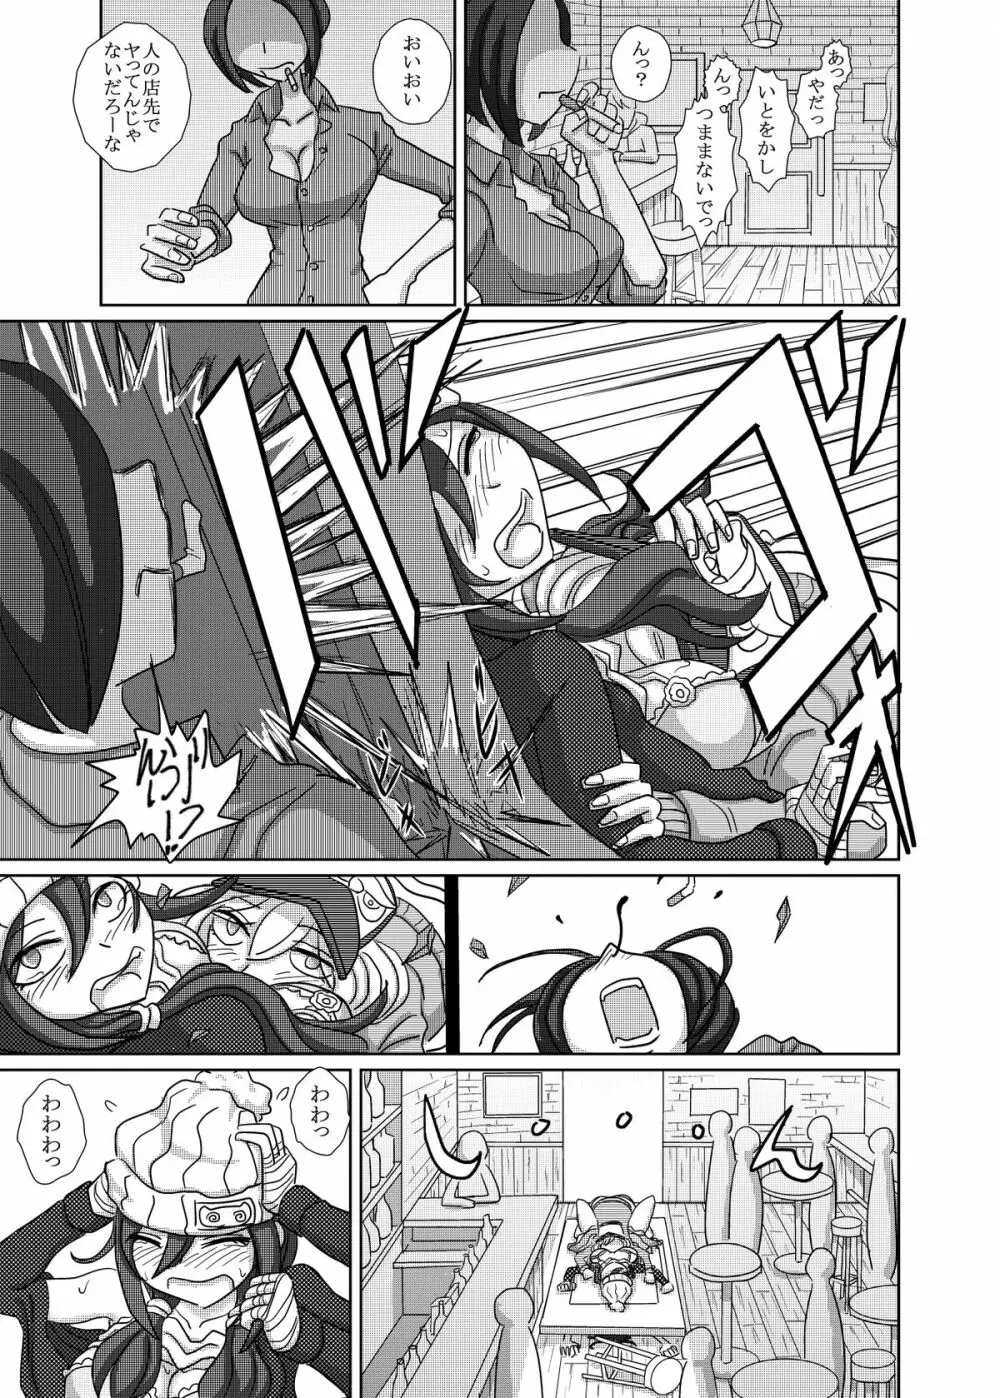 THE BATTLE OF SPITFIRE 2 Page.6